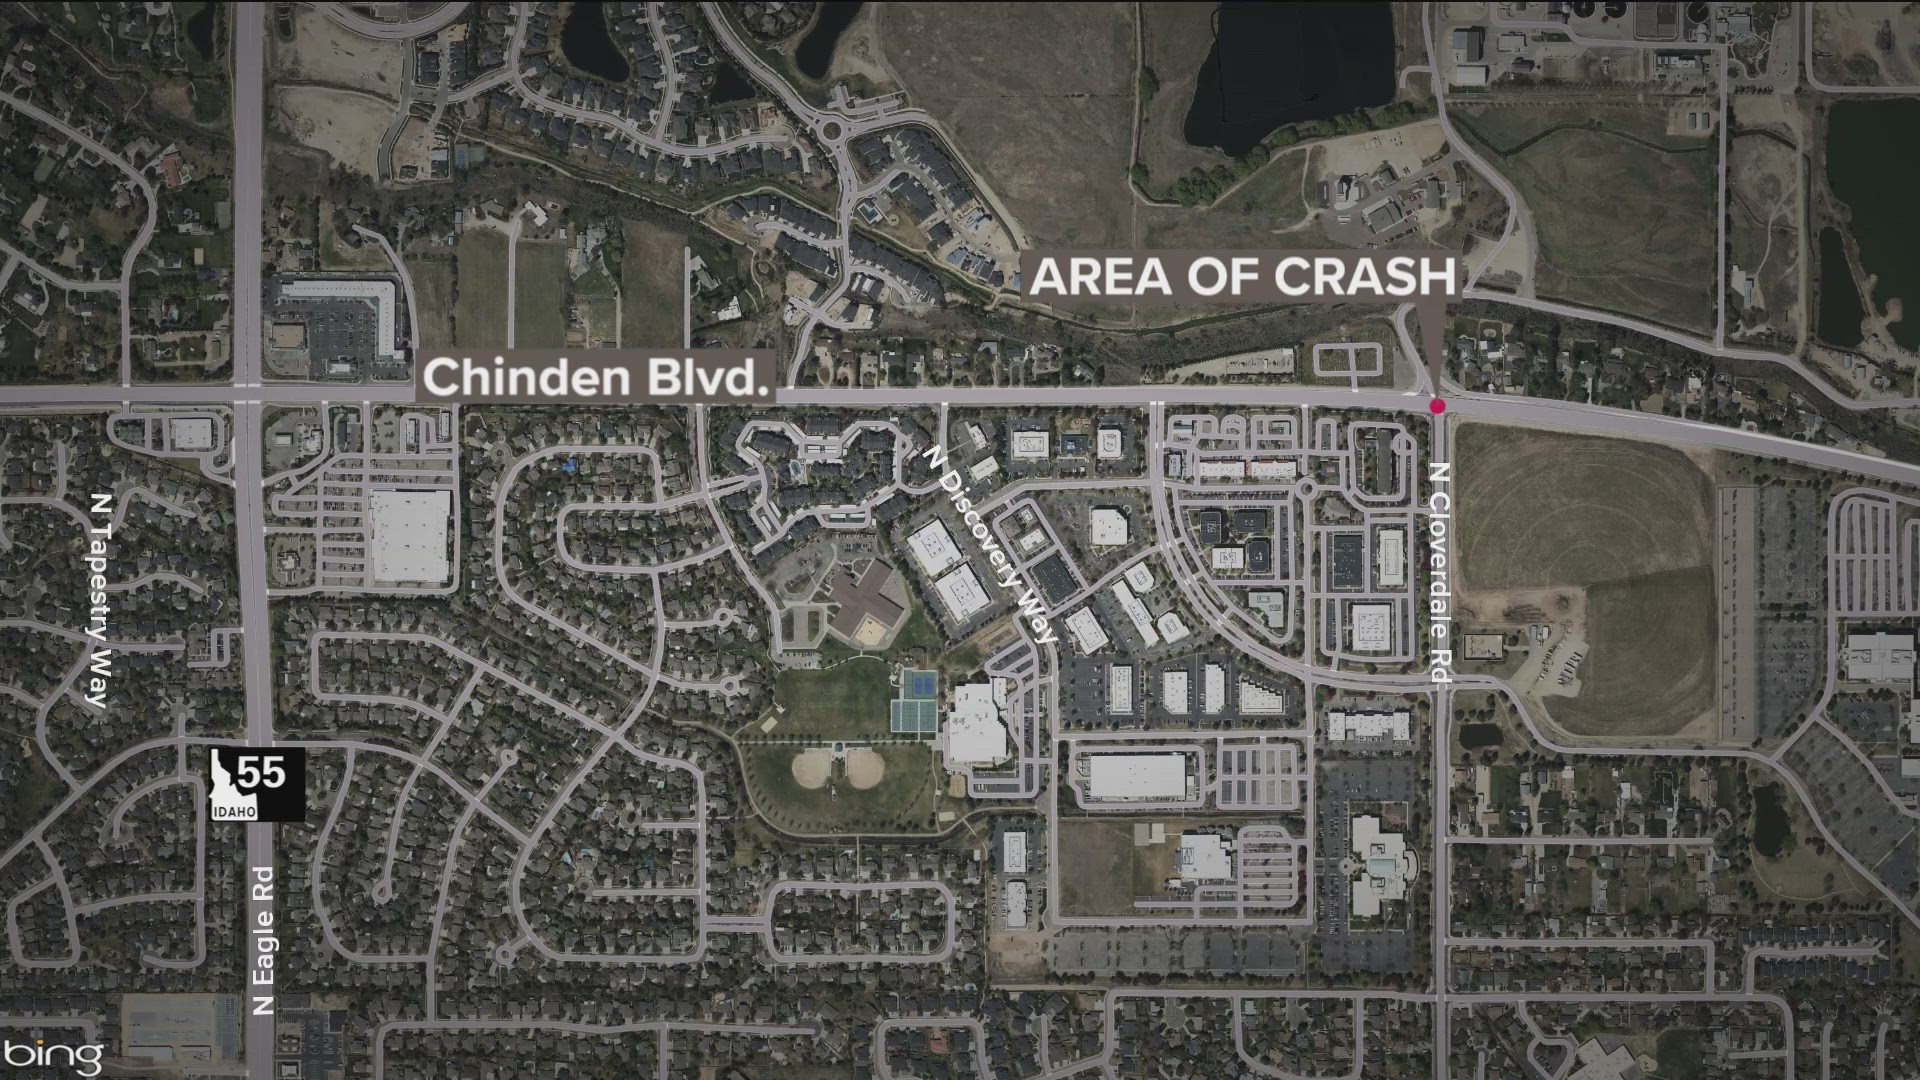 Boise Police said the two vehicles went through a chain link fence after they collided Thursday morning at the intersection of Cloverdale Road and Chinden Boulevard.